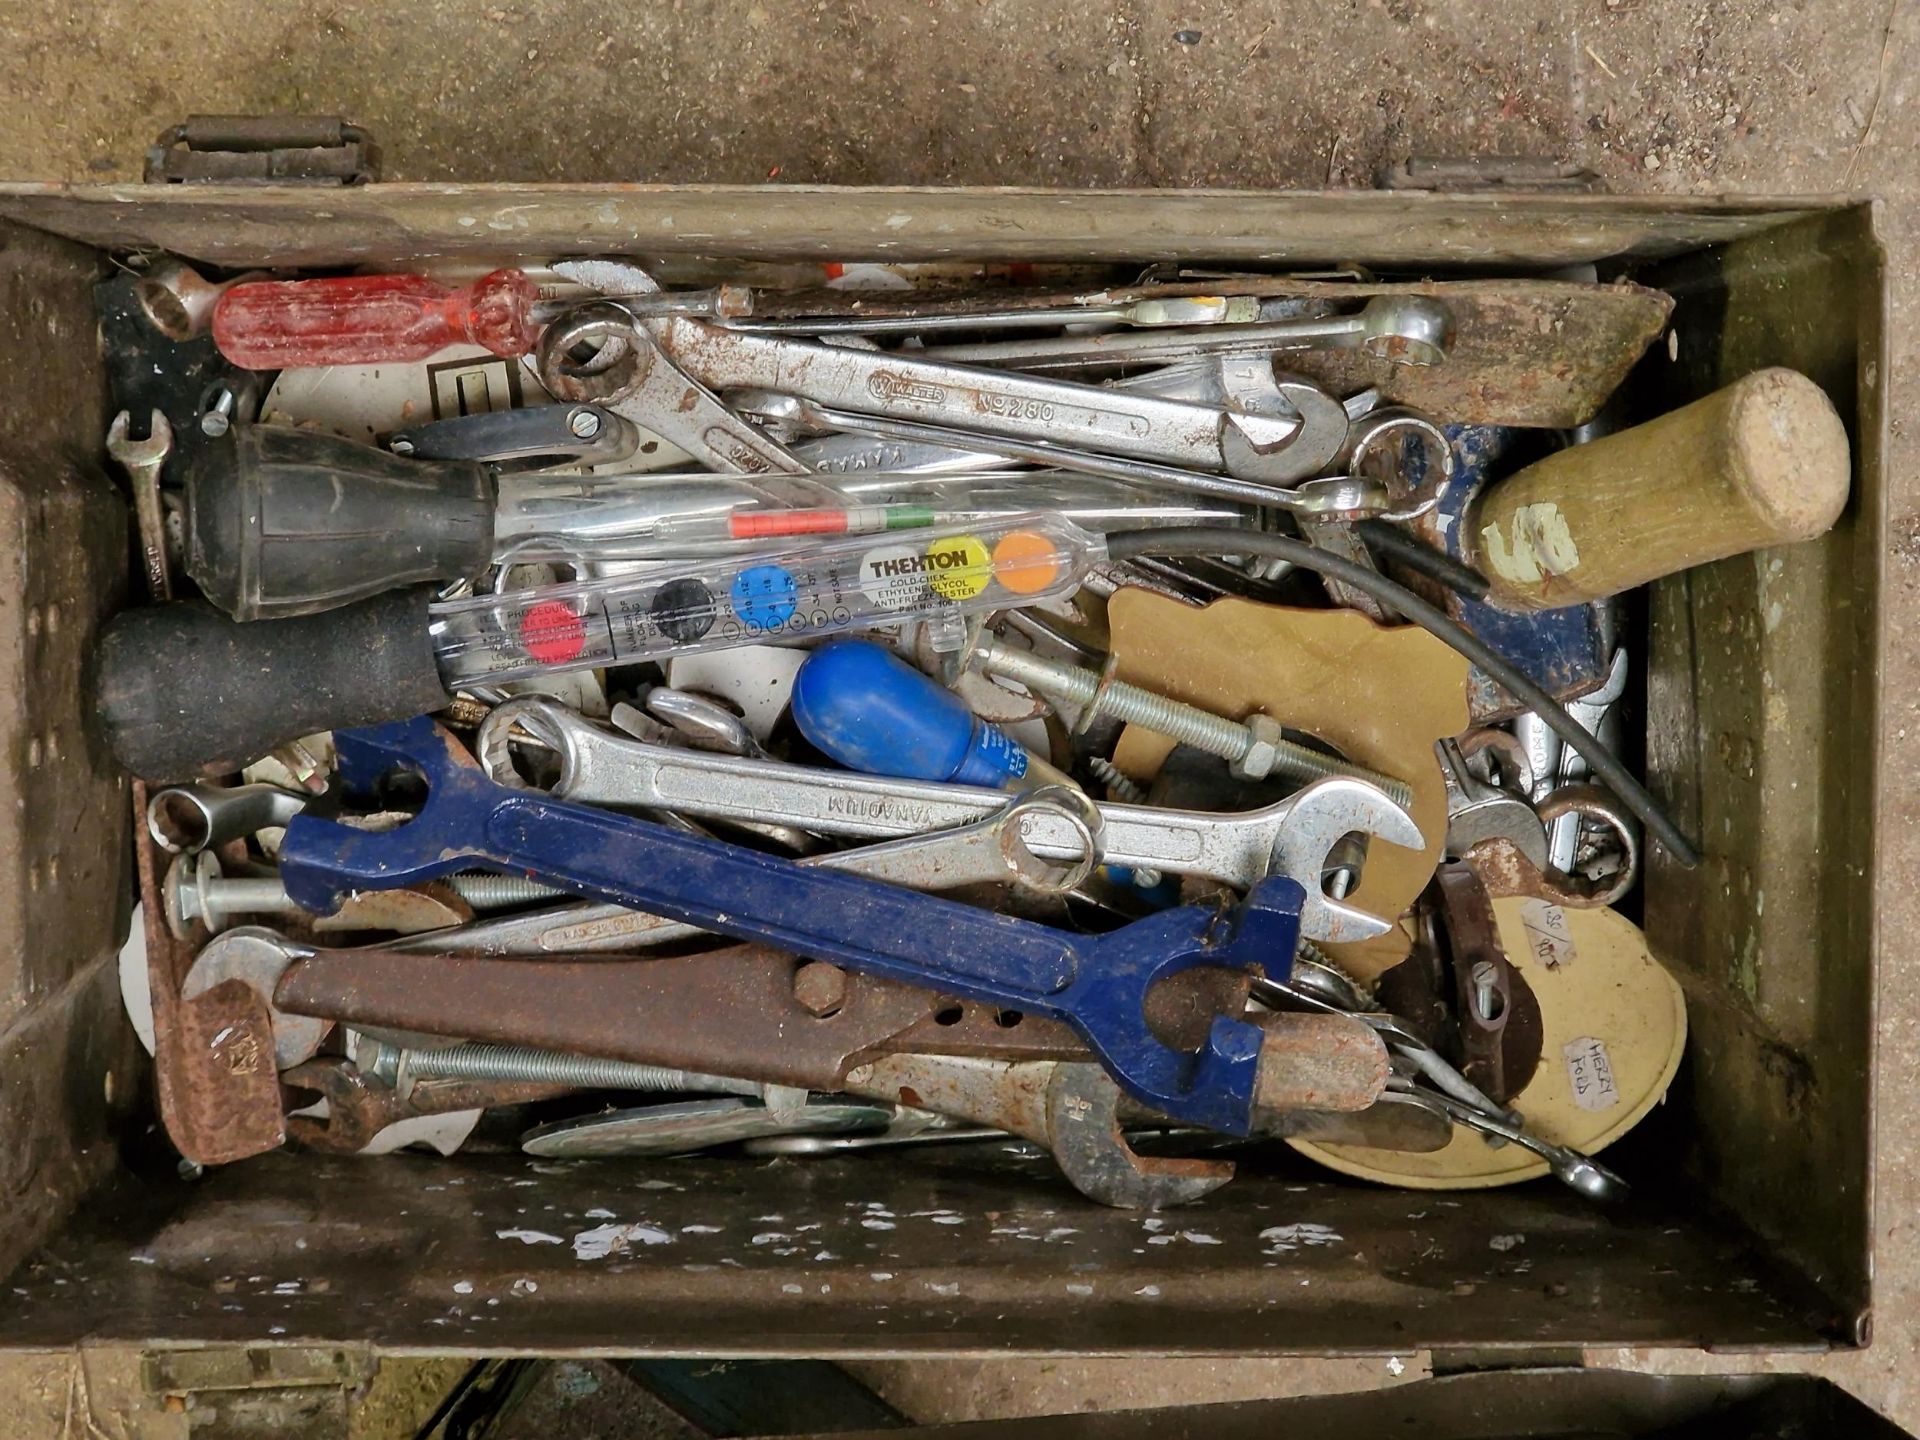 Large collection of useful tools to include, socket sets, drill bits, parkside glue gun, rivets, - Image 3 of 3